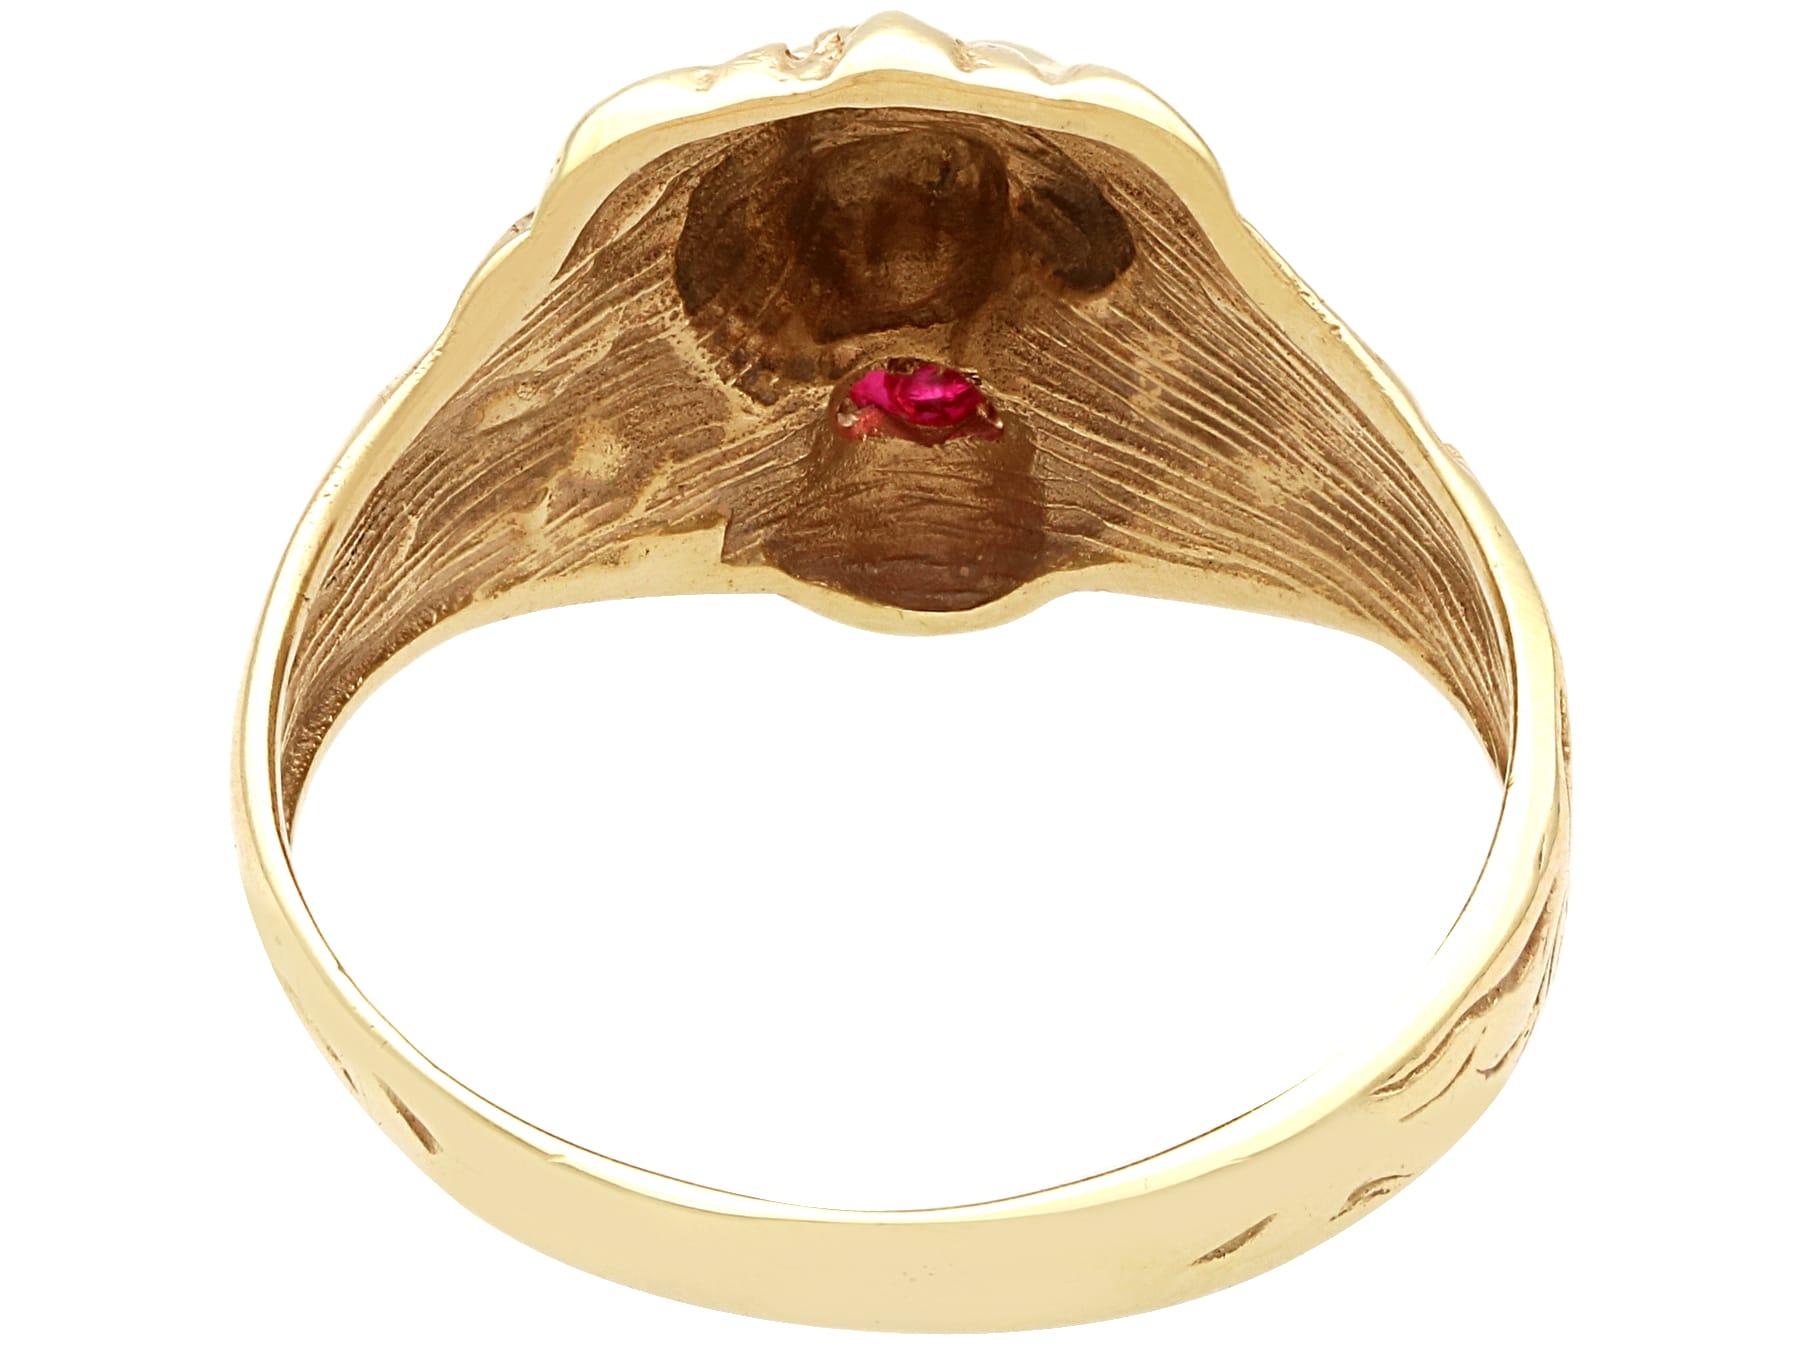 lion ring meaning